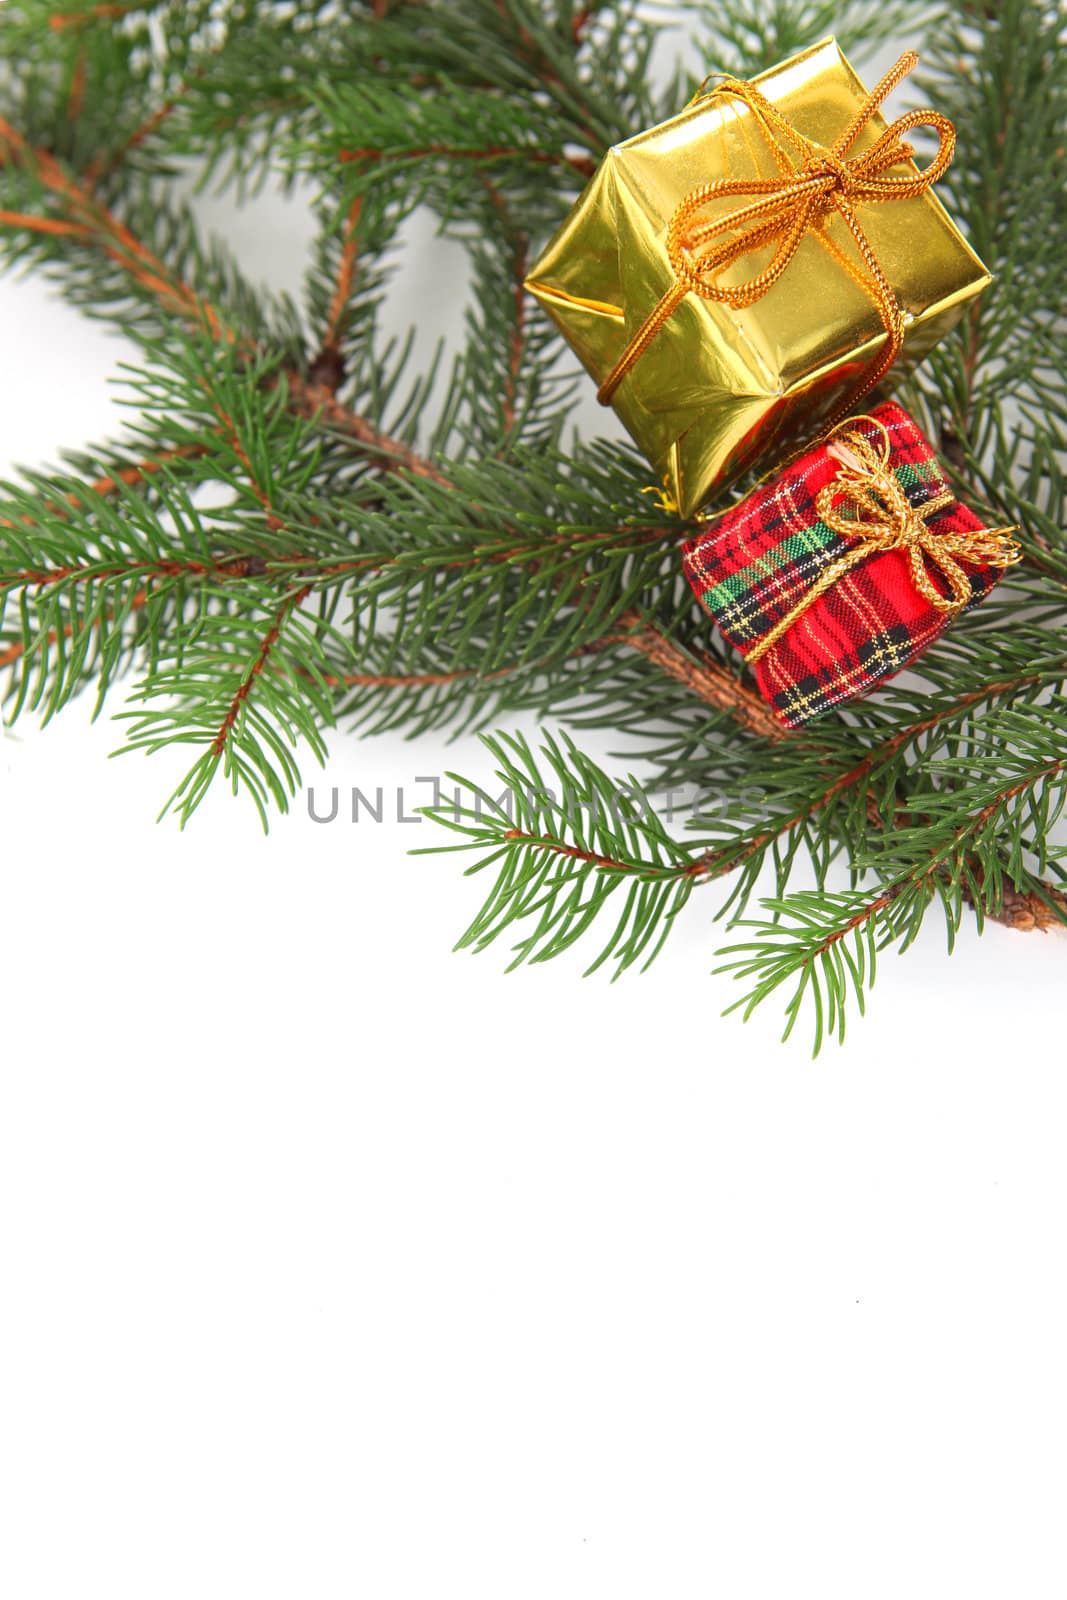 Christmas presents on a tree by phovoir